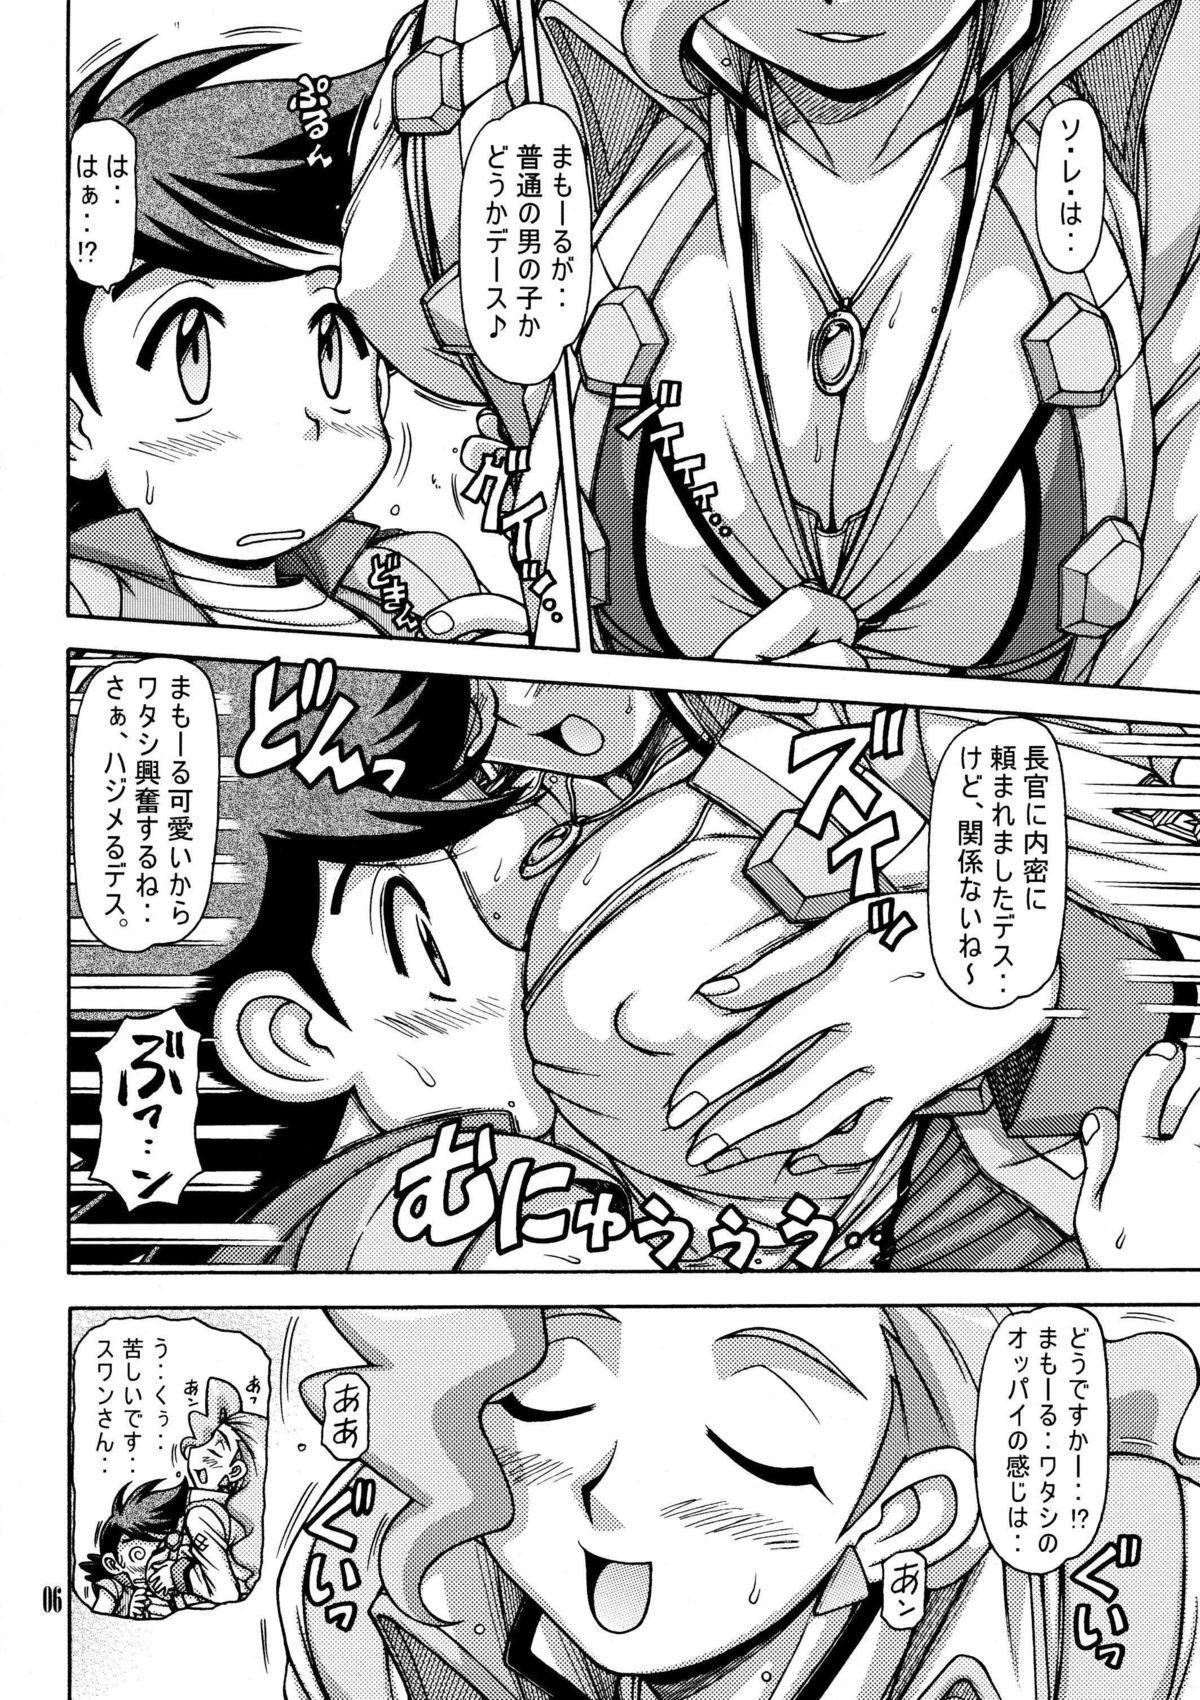 Classroom Red Muffler GGG - Gaogaigar Pussyeating - Page 5